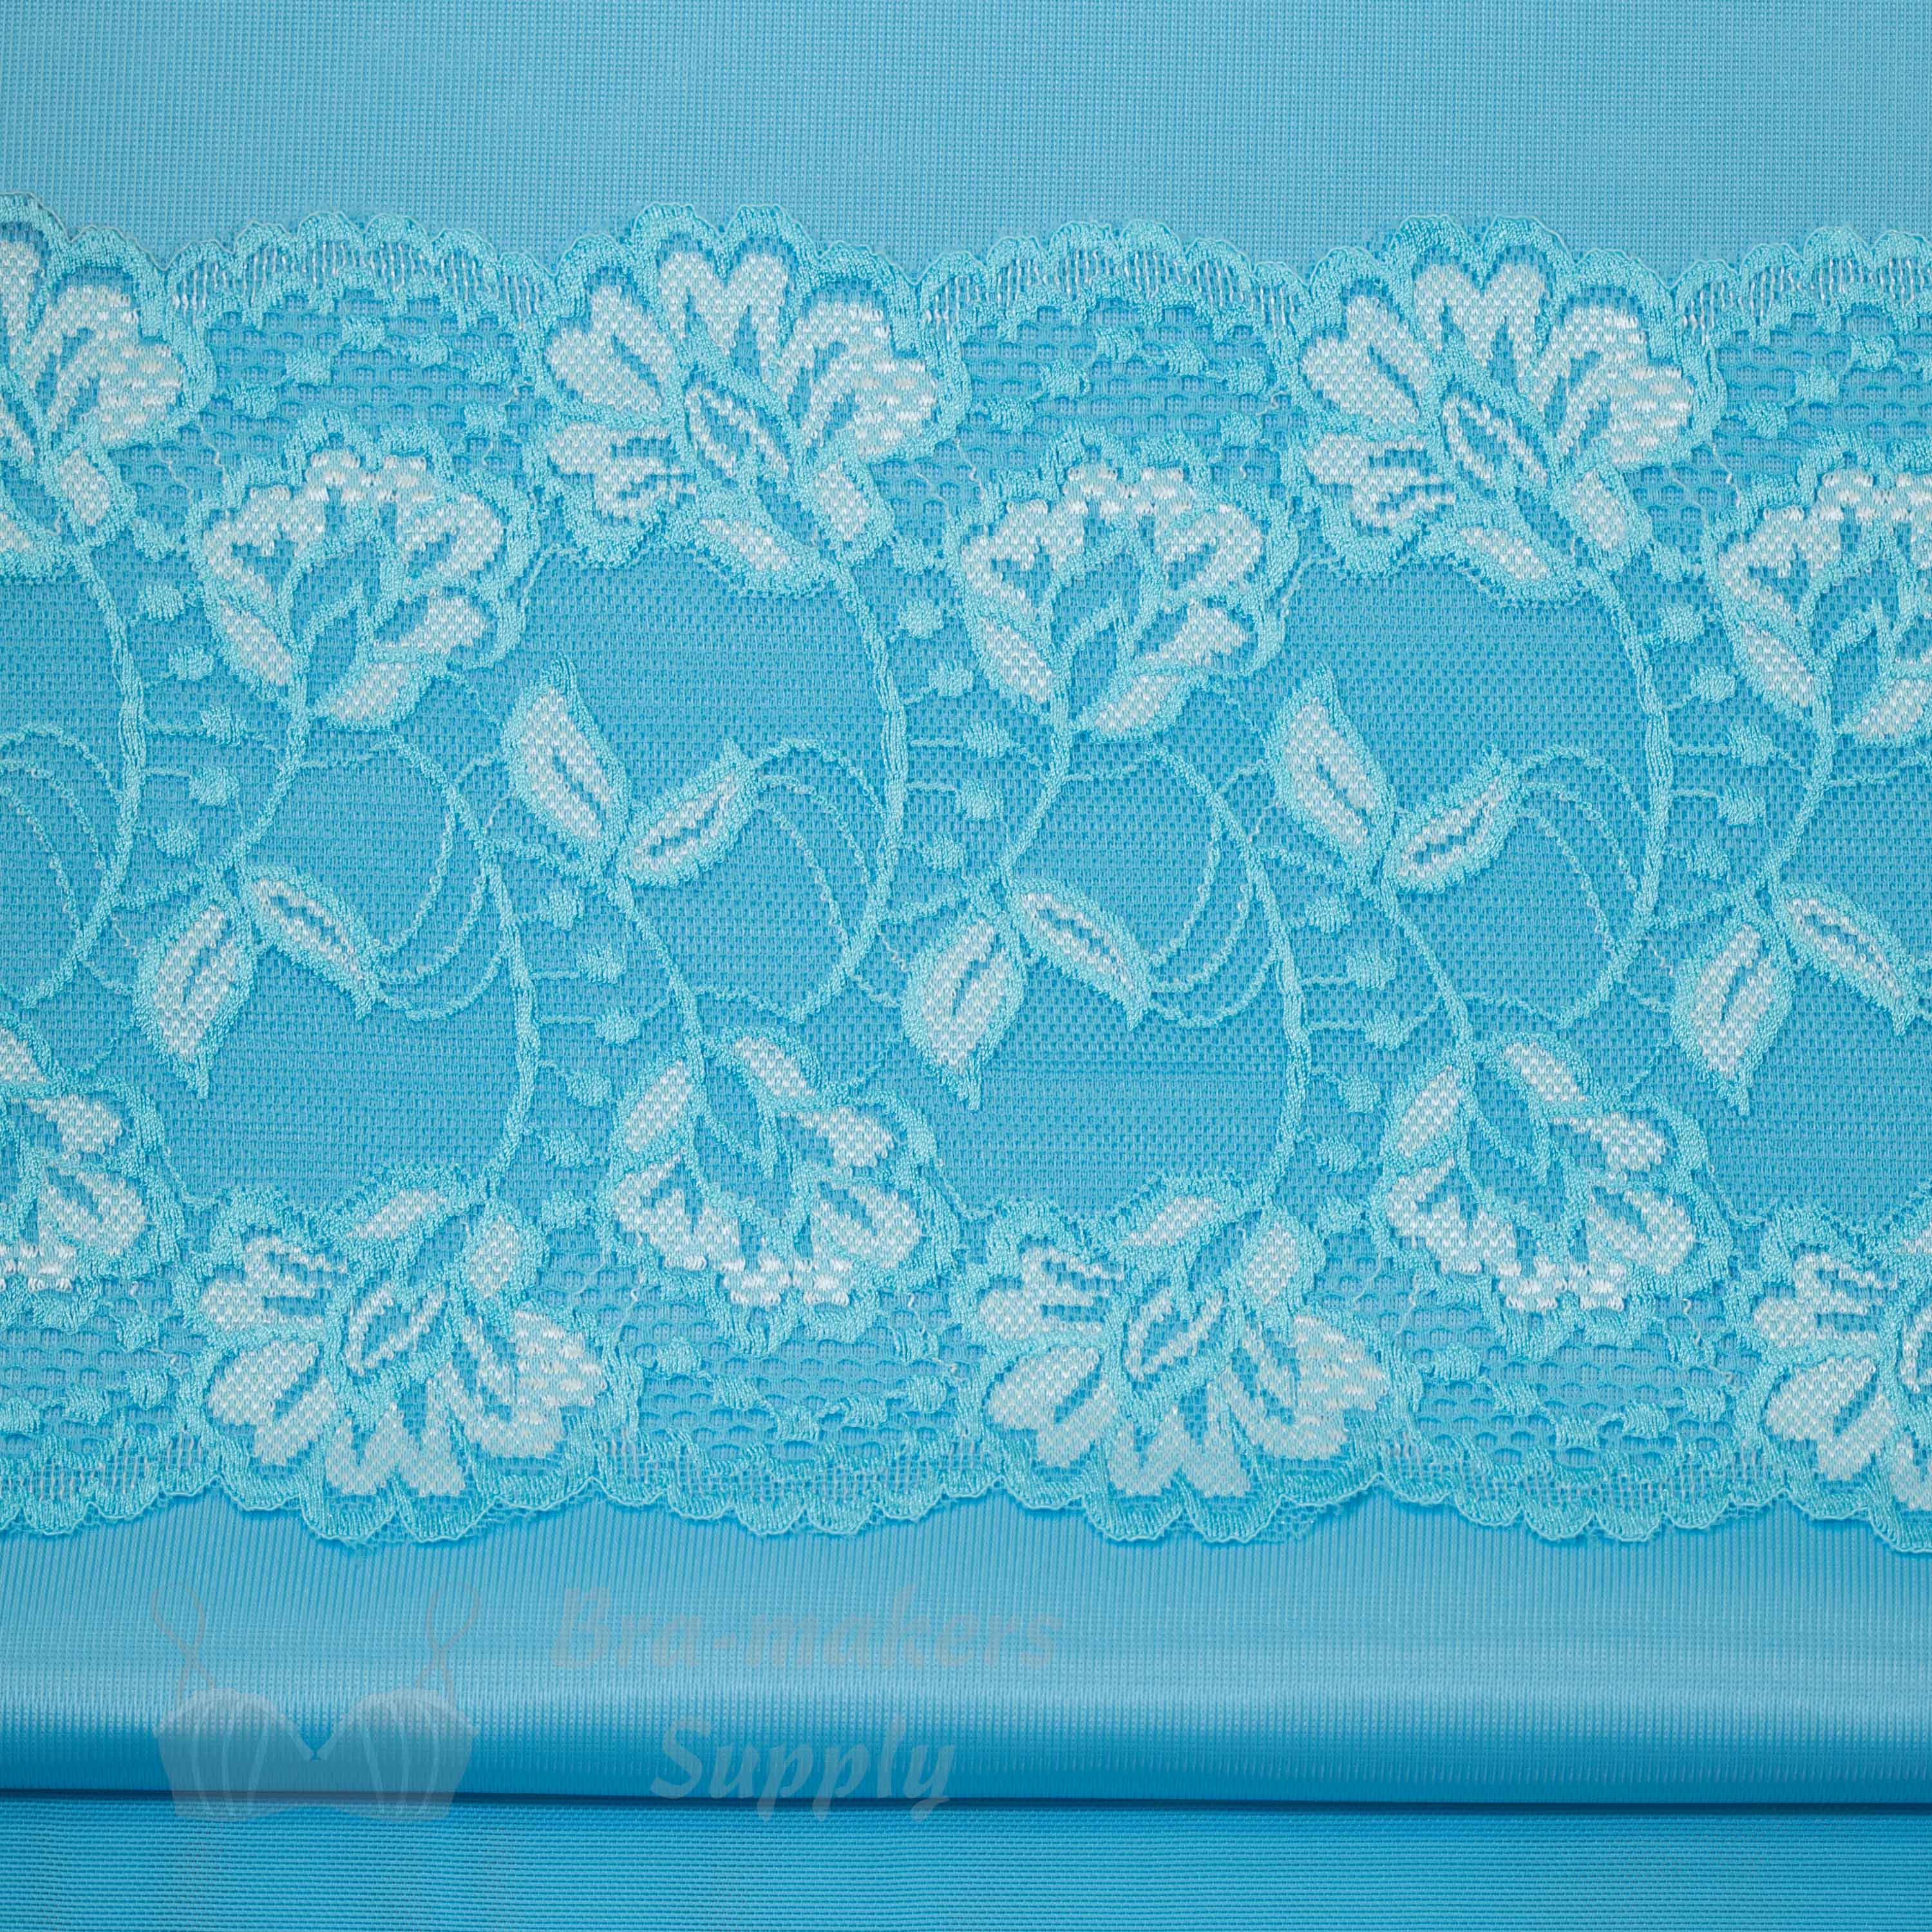 turquoise trio bra fabrics pack with turquoise stretch lace KT-65-LS-65.6510 from Bra-Makers Supply